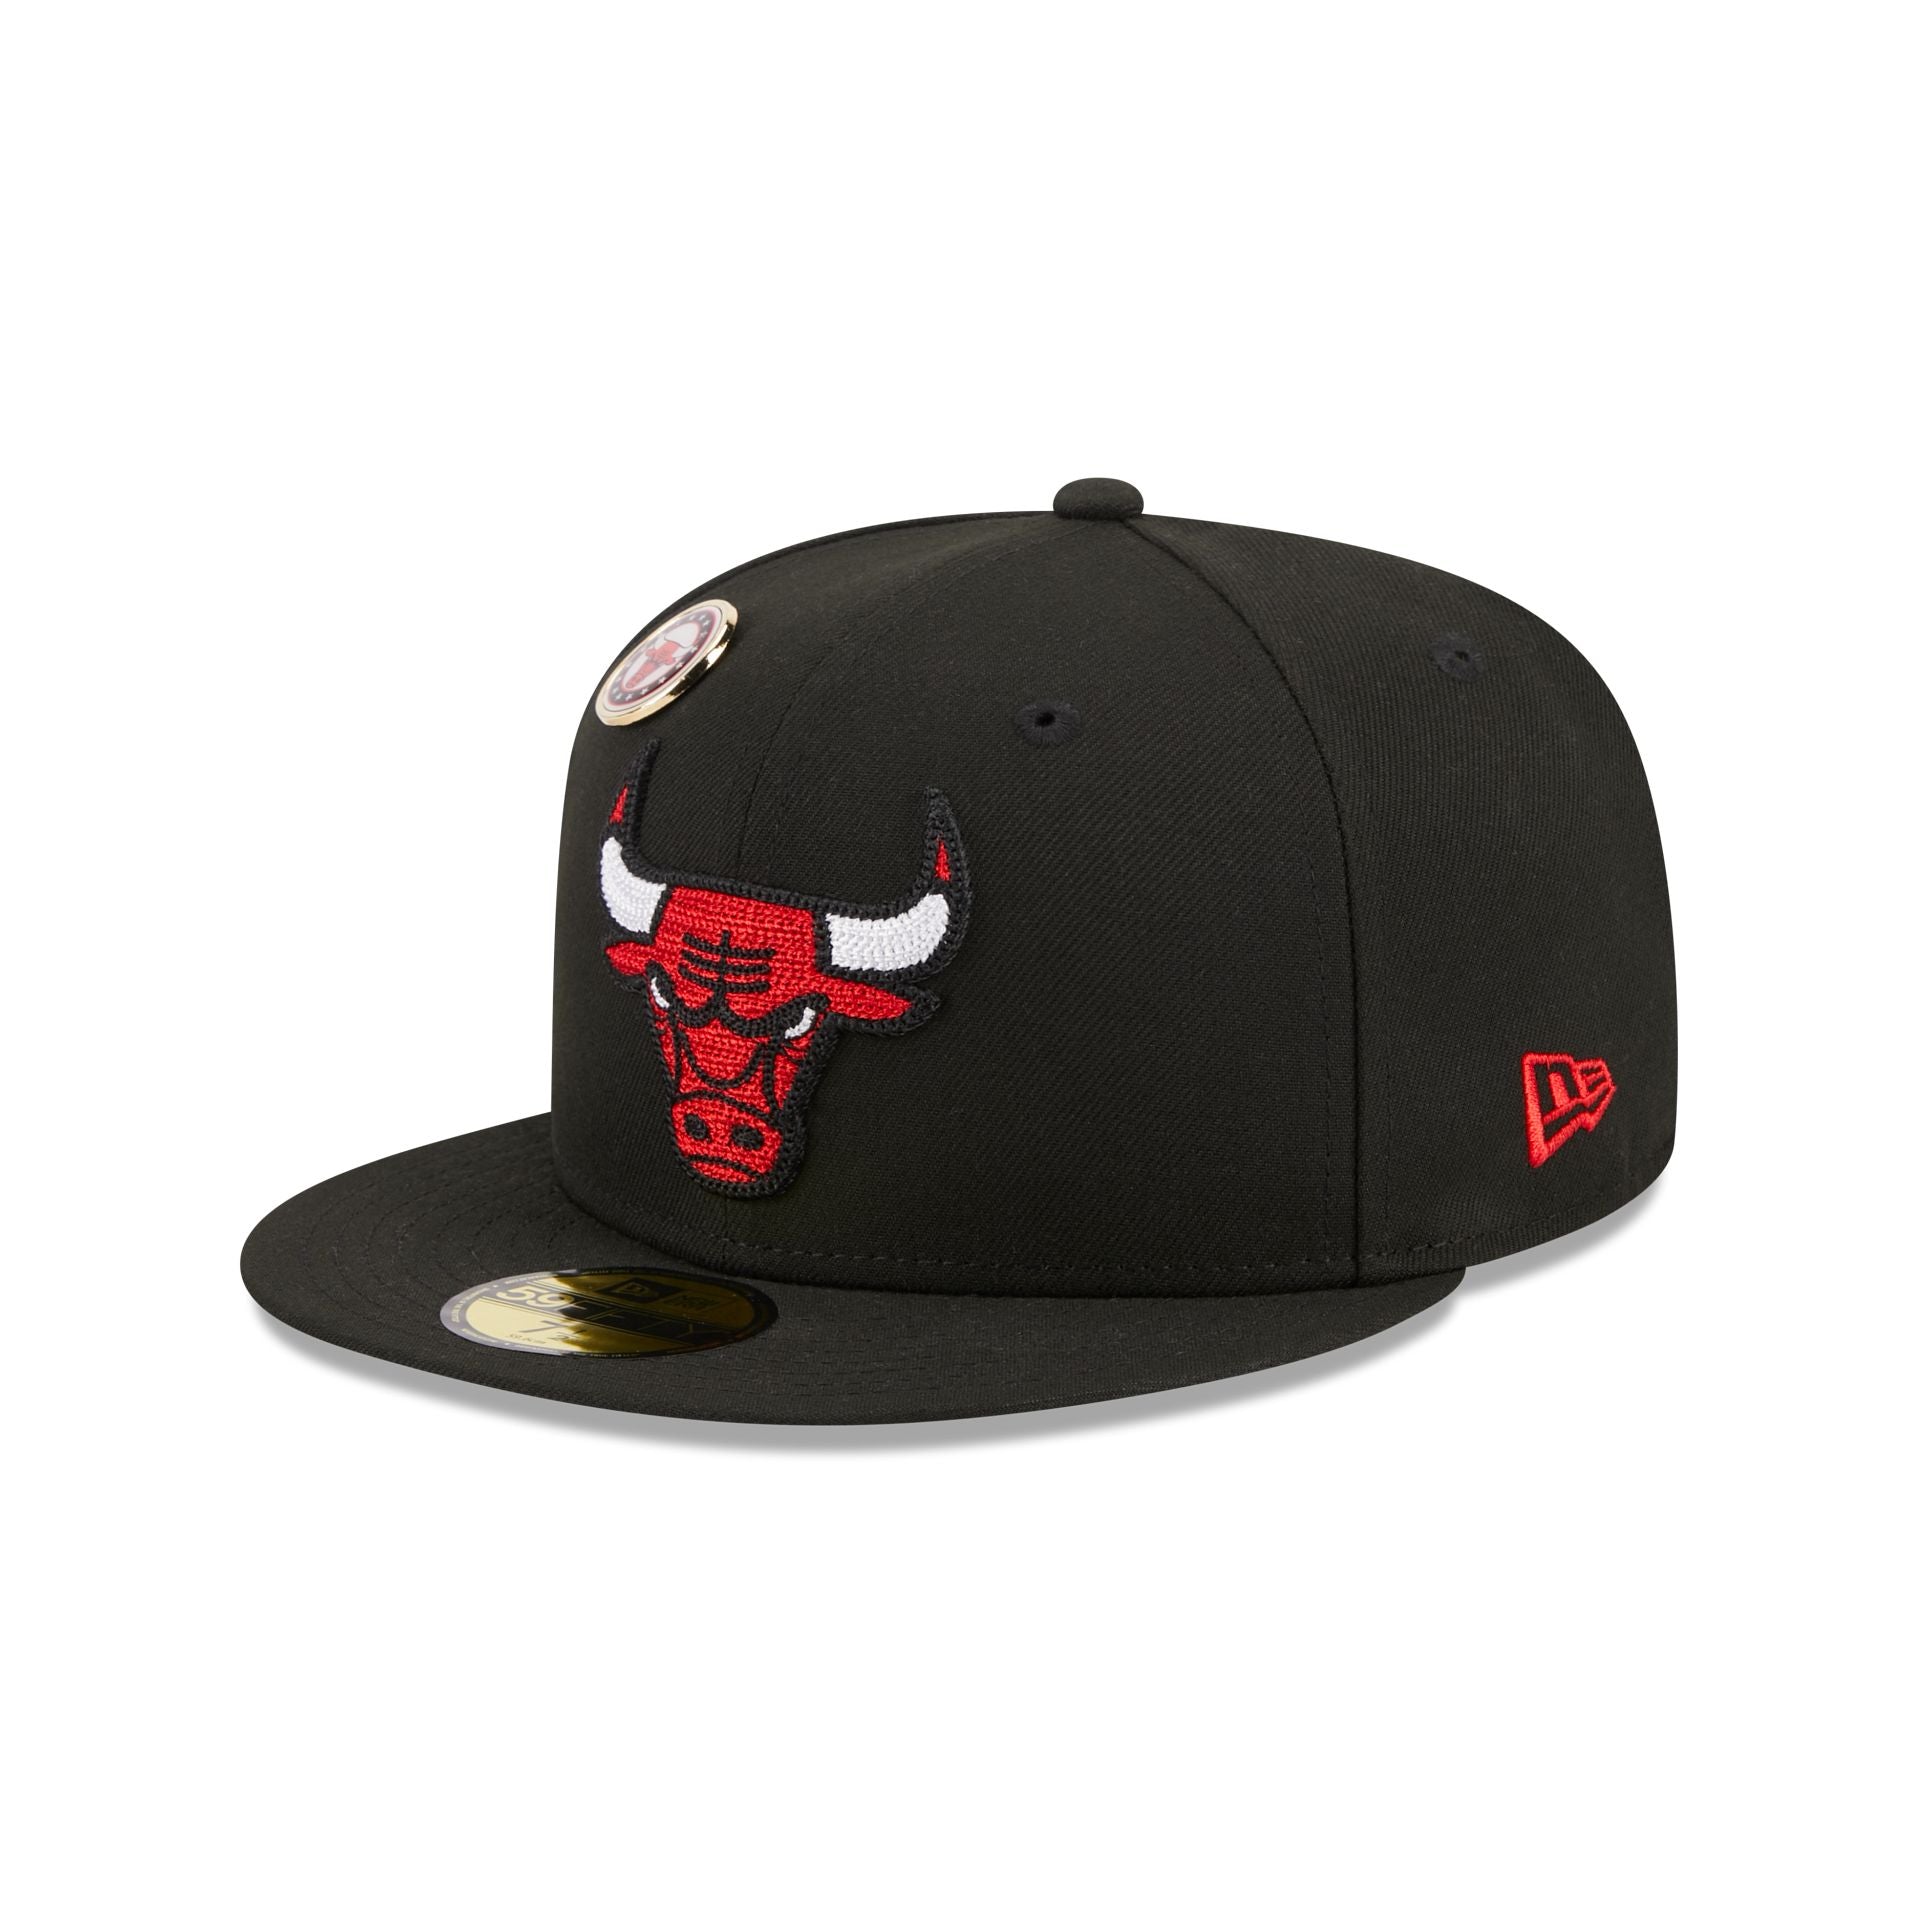 Men's New Era White Chicago Bulls Throwback Satin 59FIFTY Fitted Hat